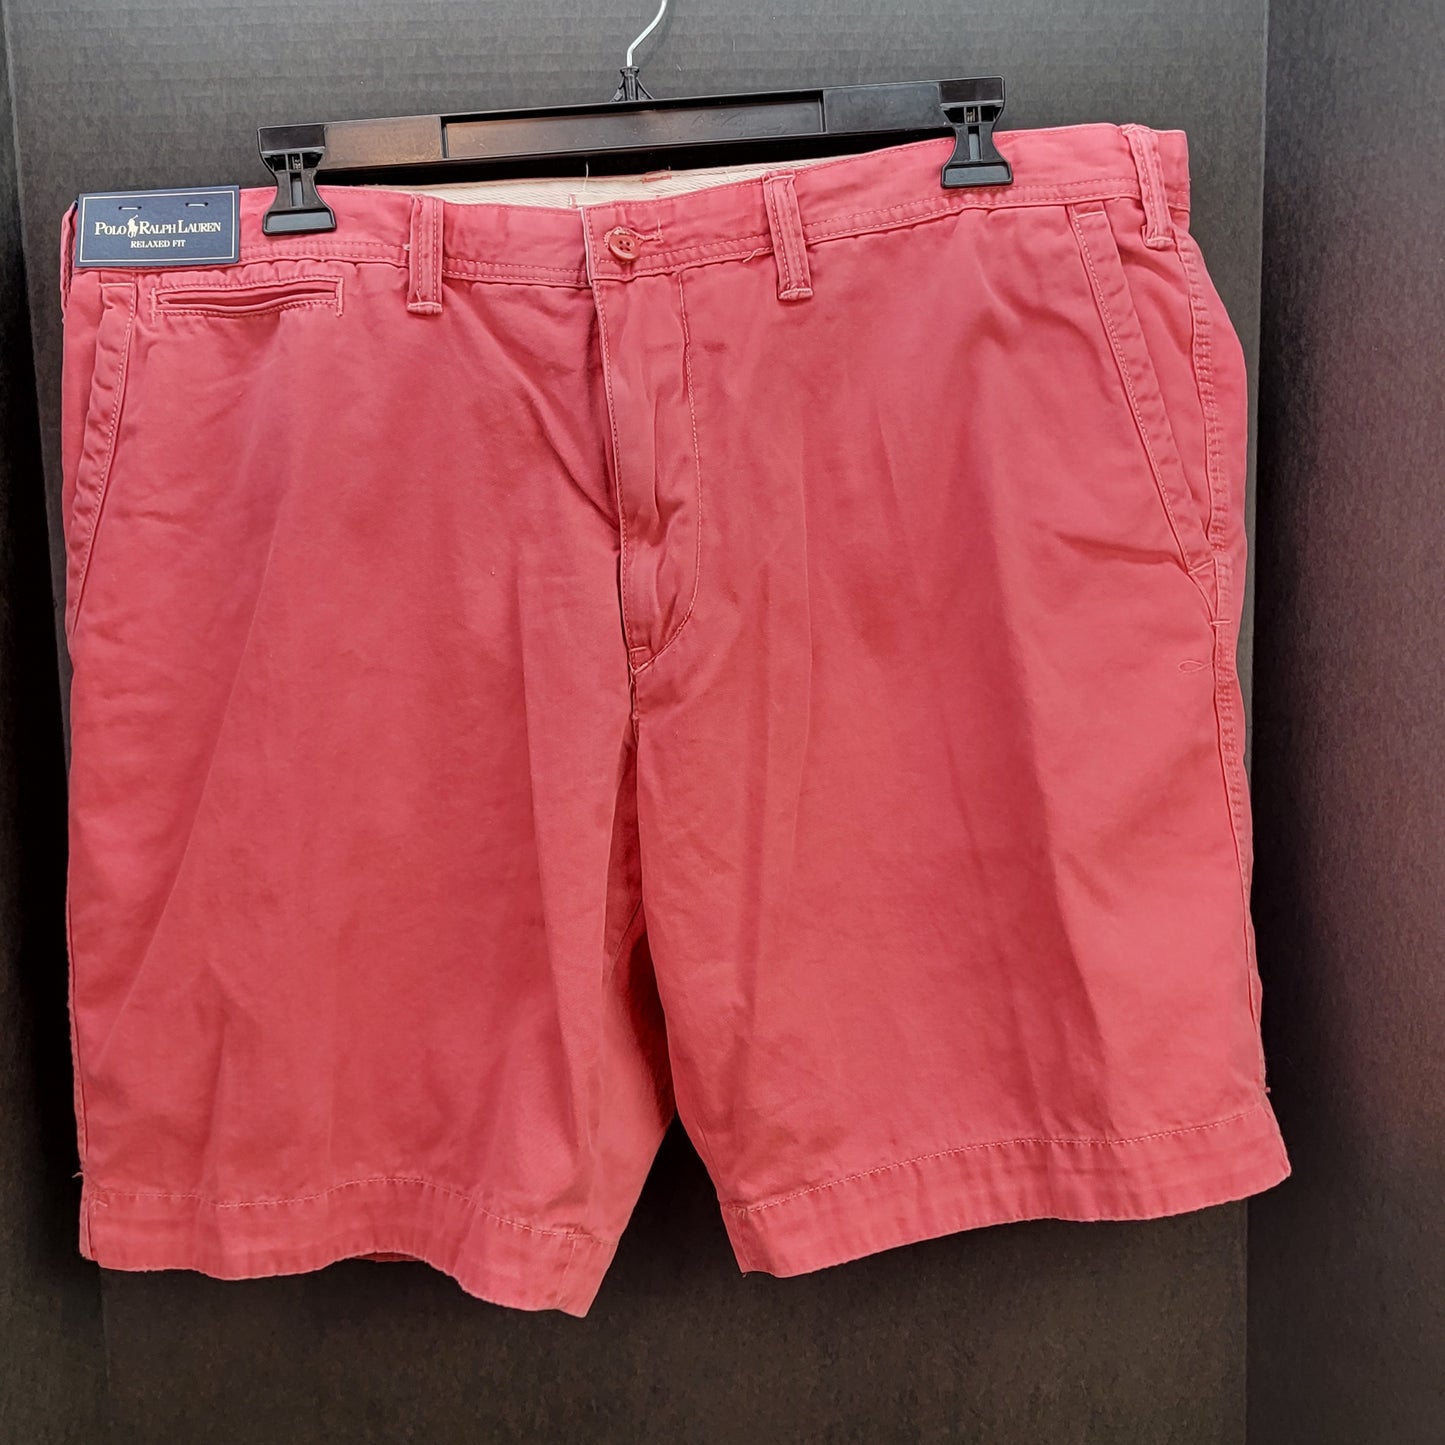 Polo Ralph Lauren Men's Relaxed Fit Shorts Size 42W Retail $70.00 New with Tags